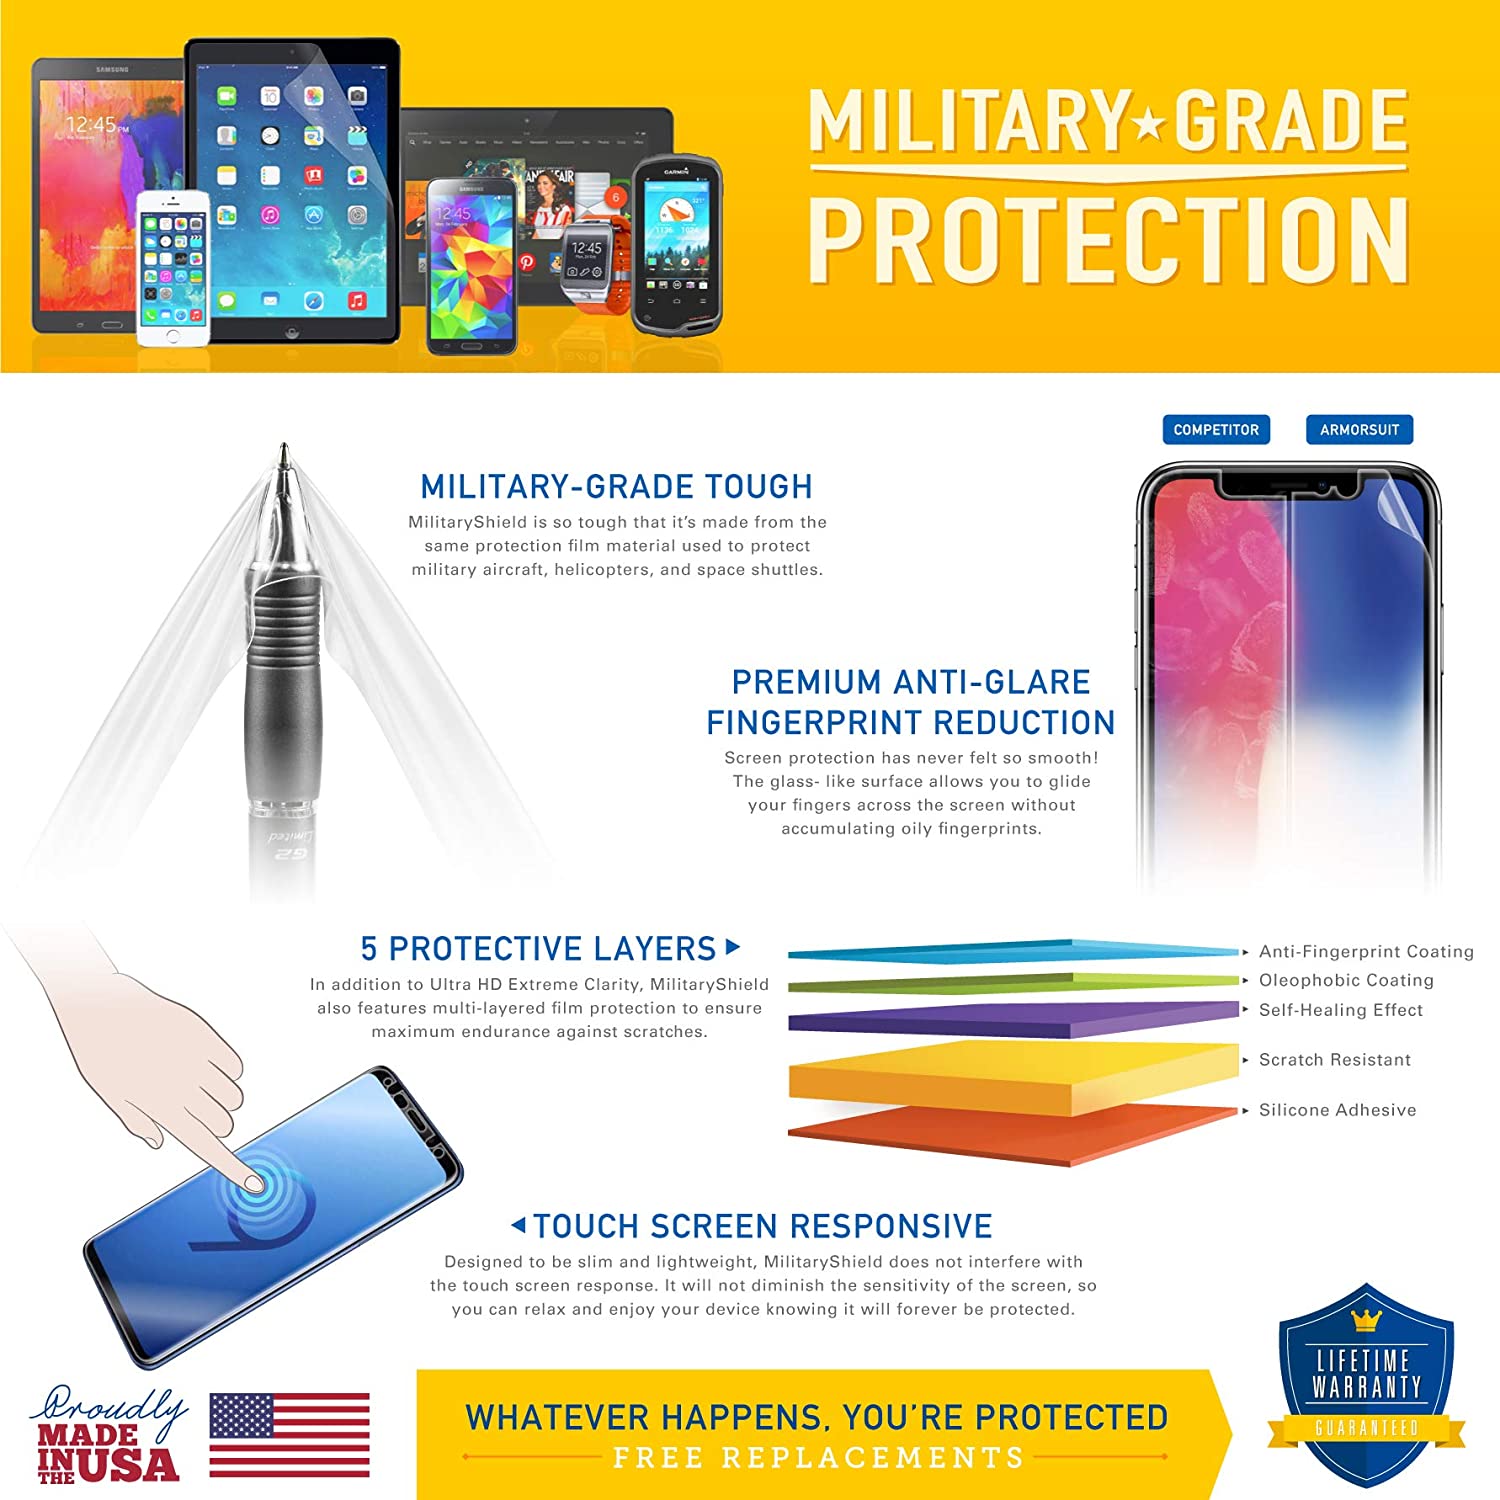 [2-Pack] Samsung Galaxy Express Prime (1st Gen) Screen Protector